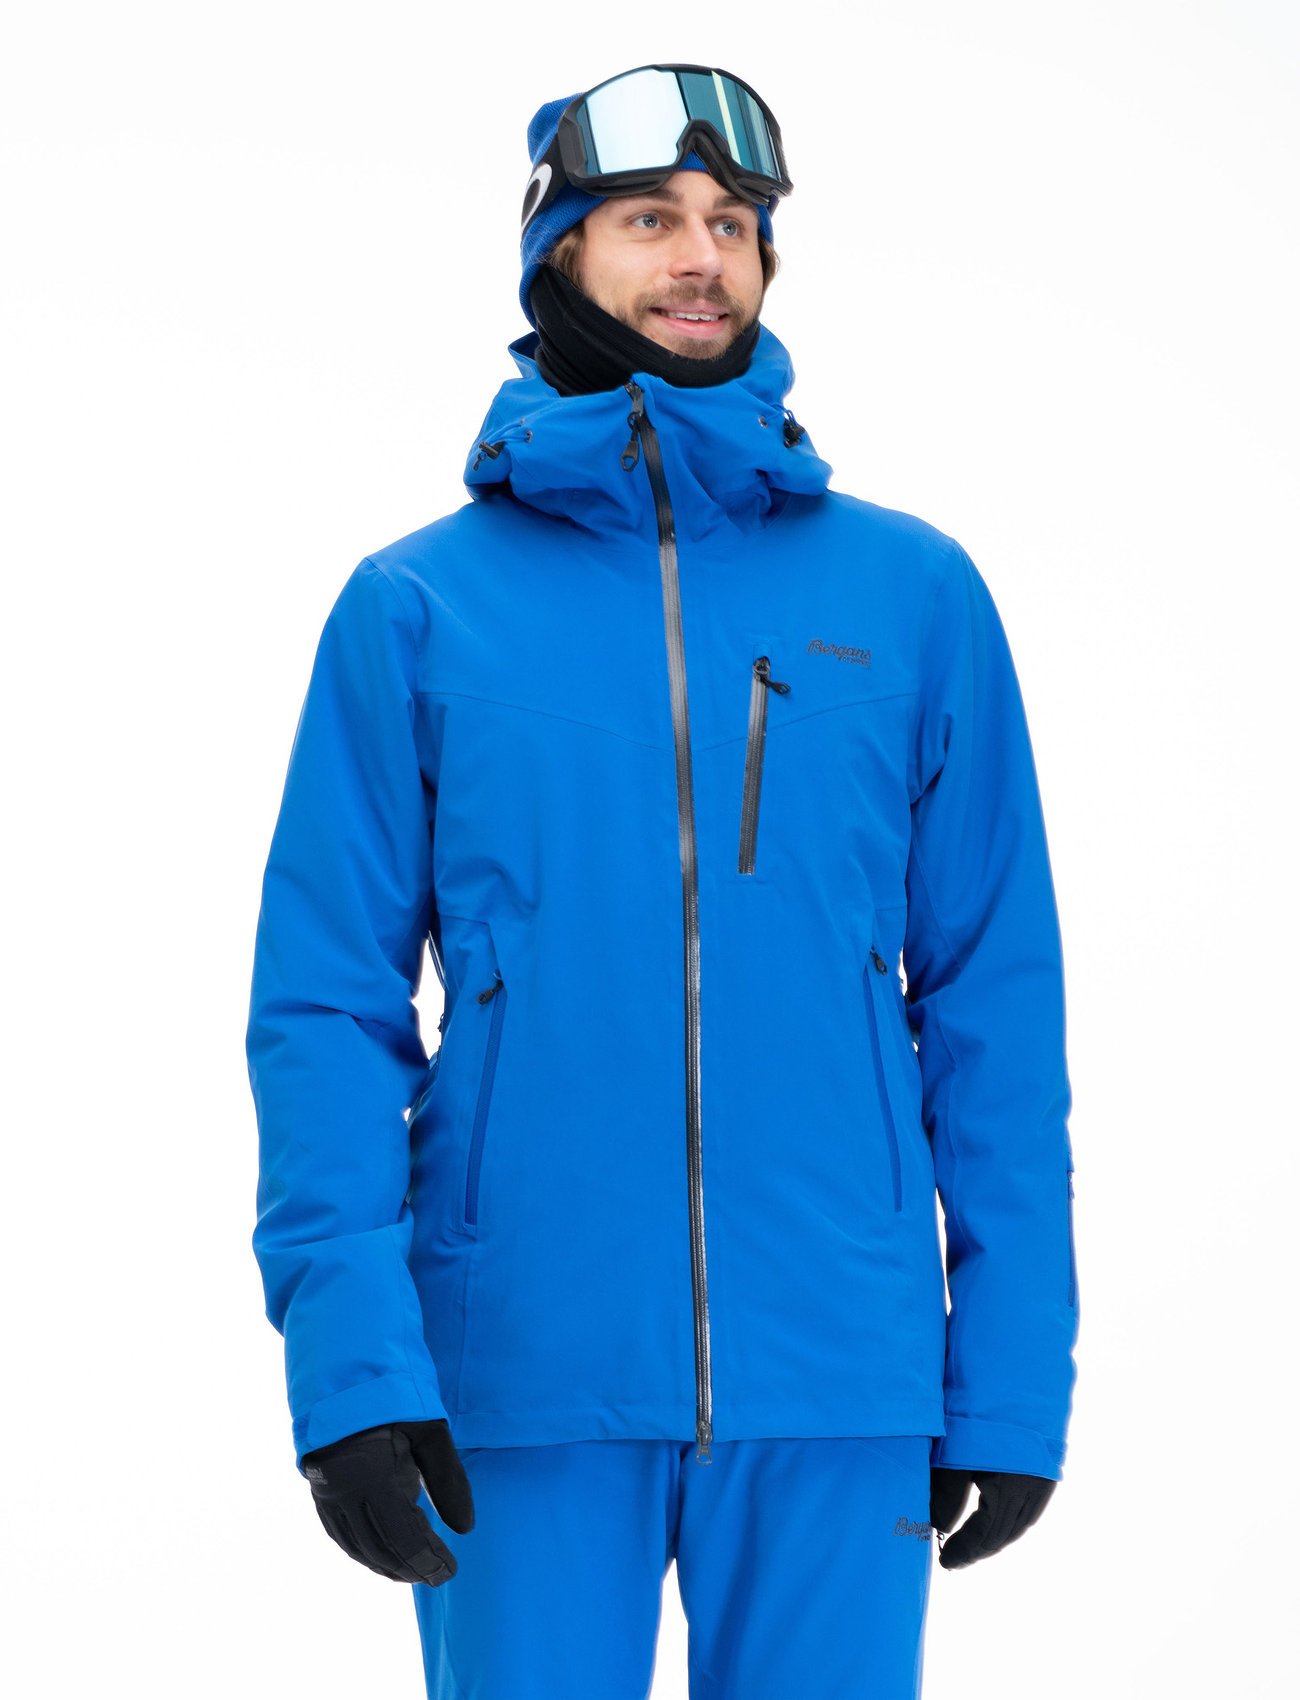 Oppdal Insulated Jacket | Boozt.com